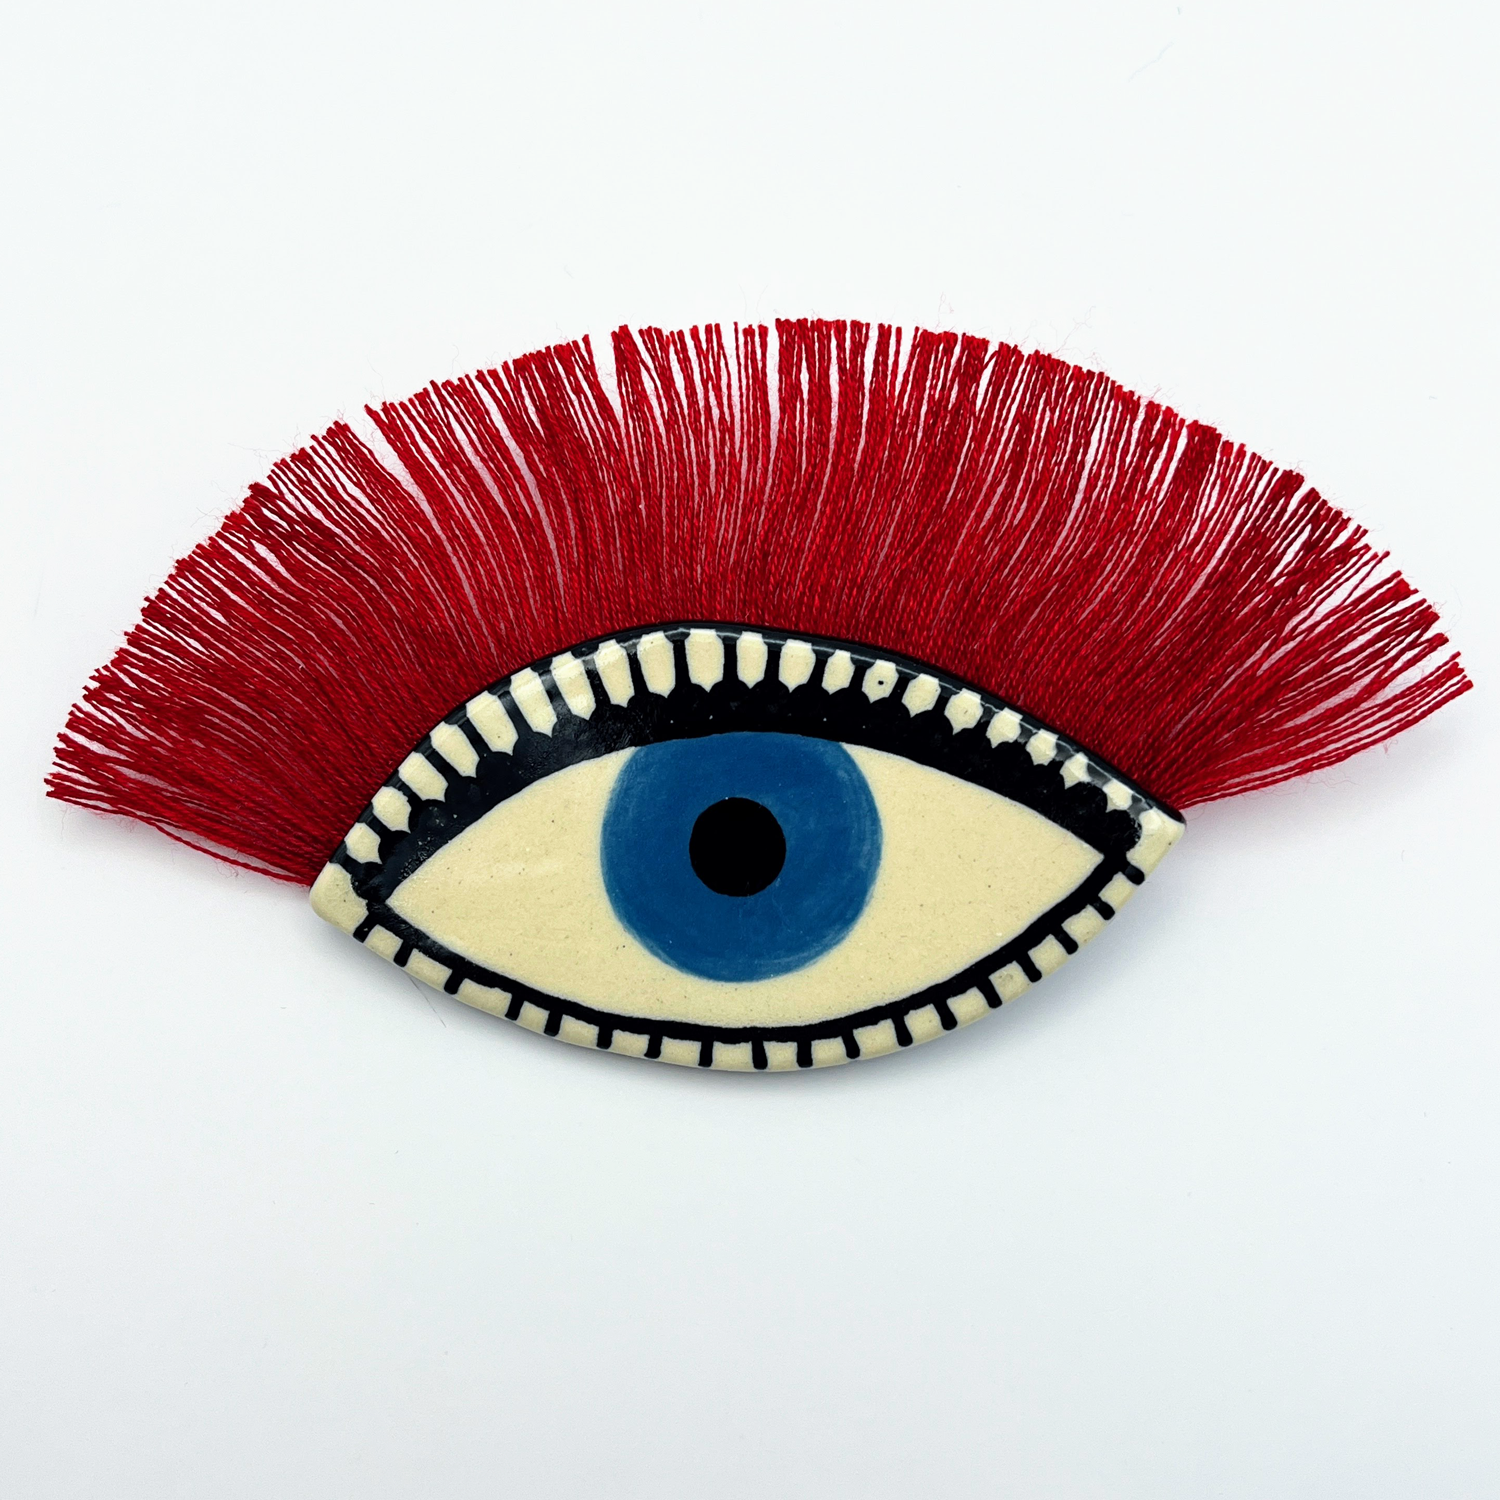 Here and Here: Blue Eye Brooch with Red Lashes Product Image 1 of 2